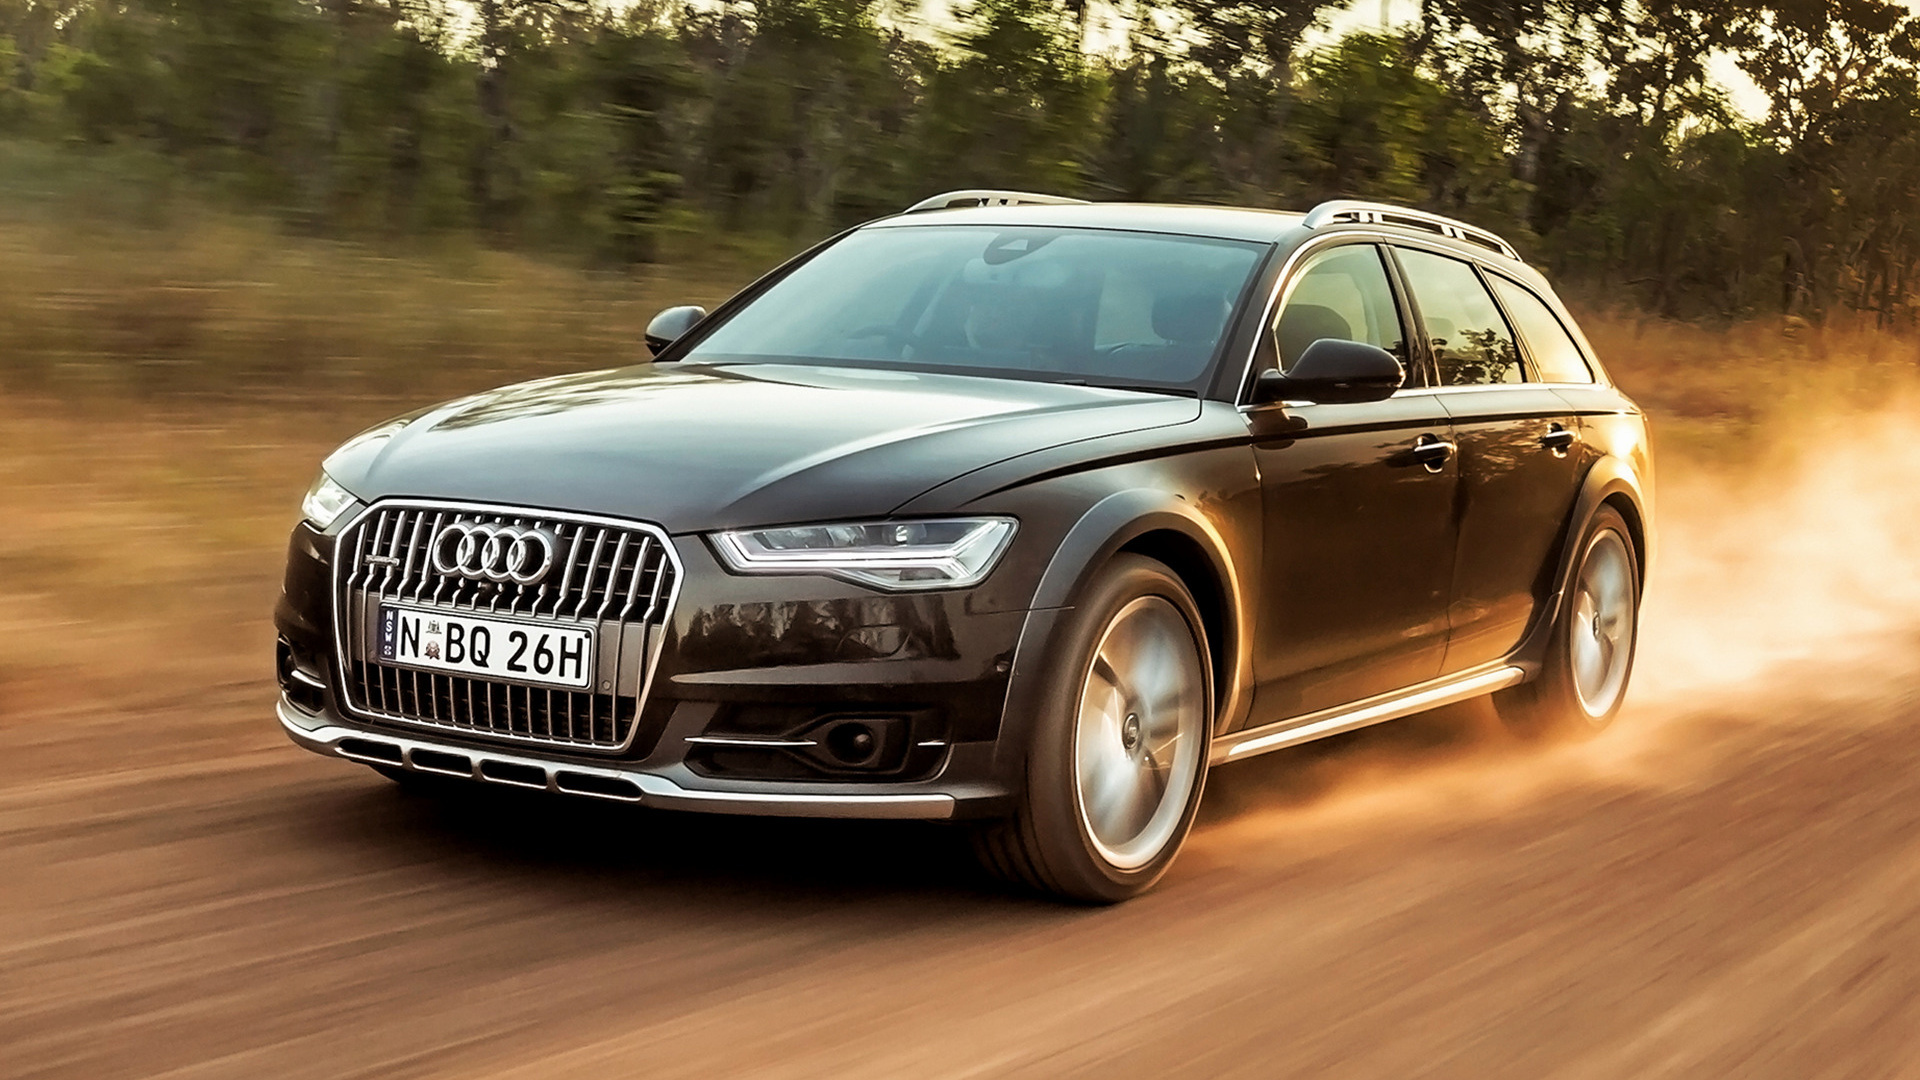 Audi A6 Allroad, All-terrain capability, Unmatched versatility, Luxury and performance, 1920x1080 Full HD Desktop